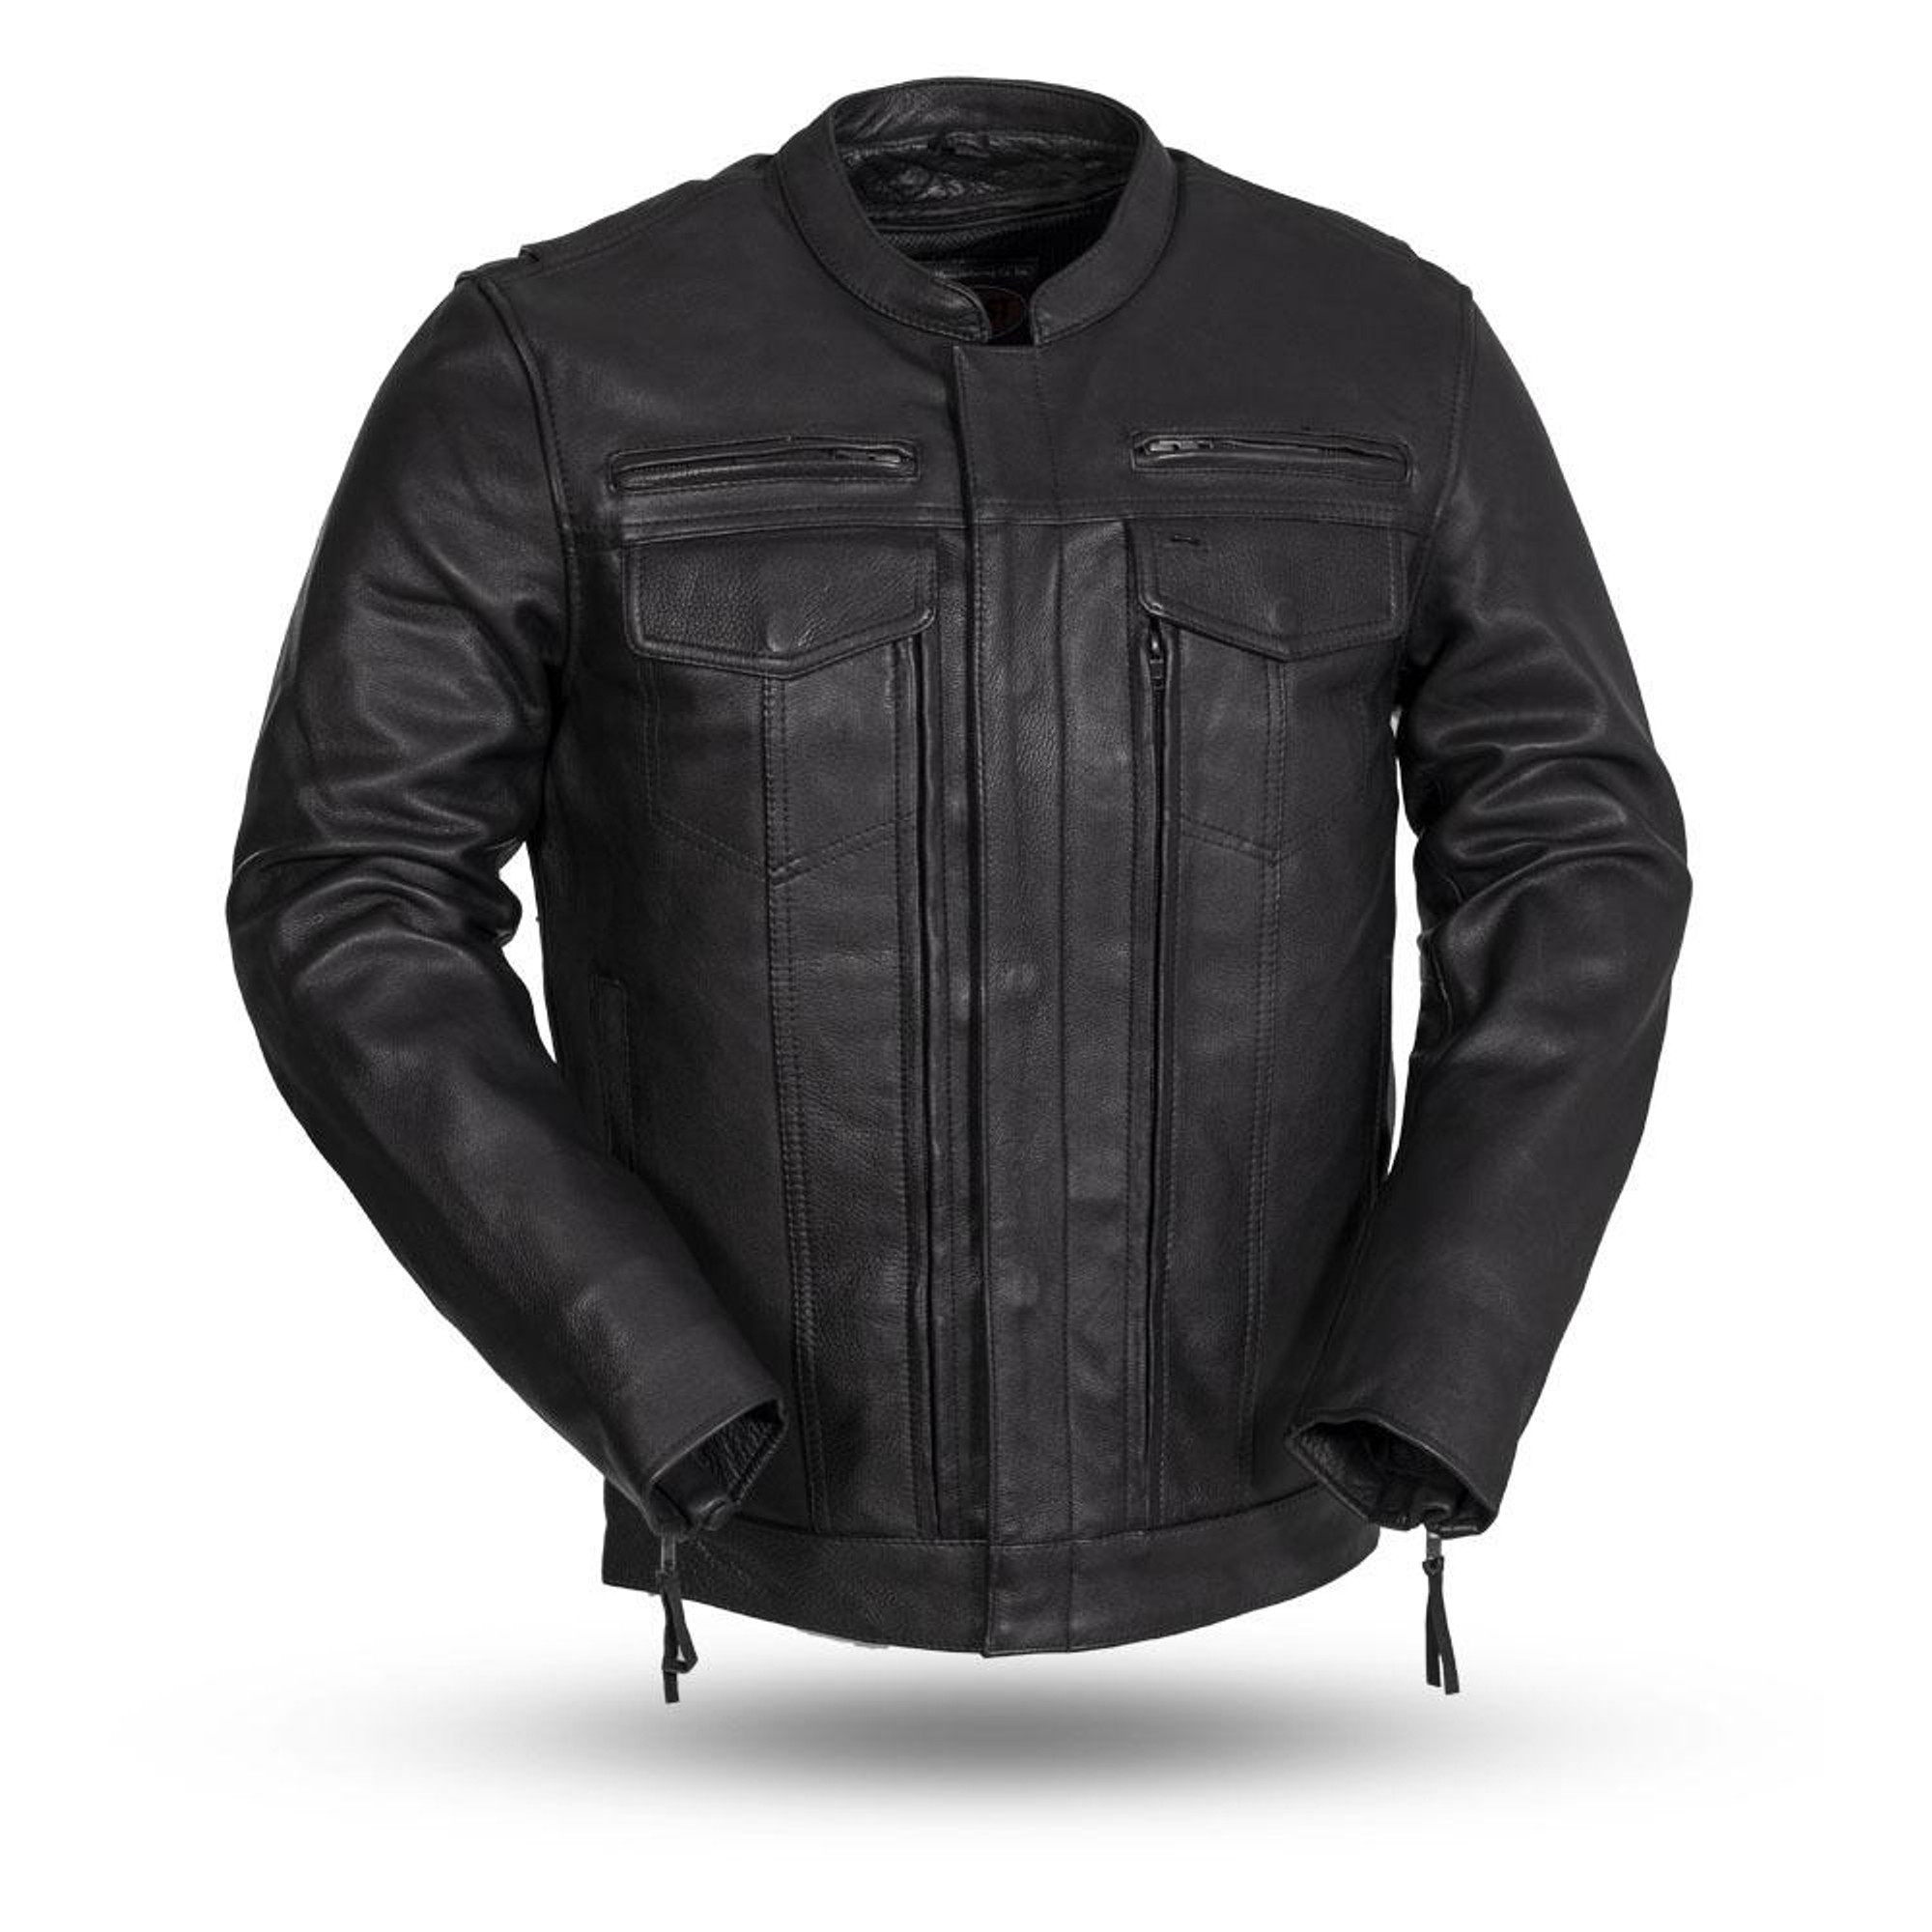 Royal Enfield Windfarer V2 Riding Jacket Launched in India at Rs 9,500 -  autoX